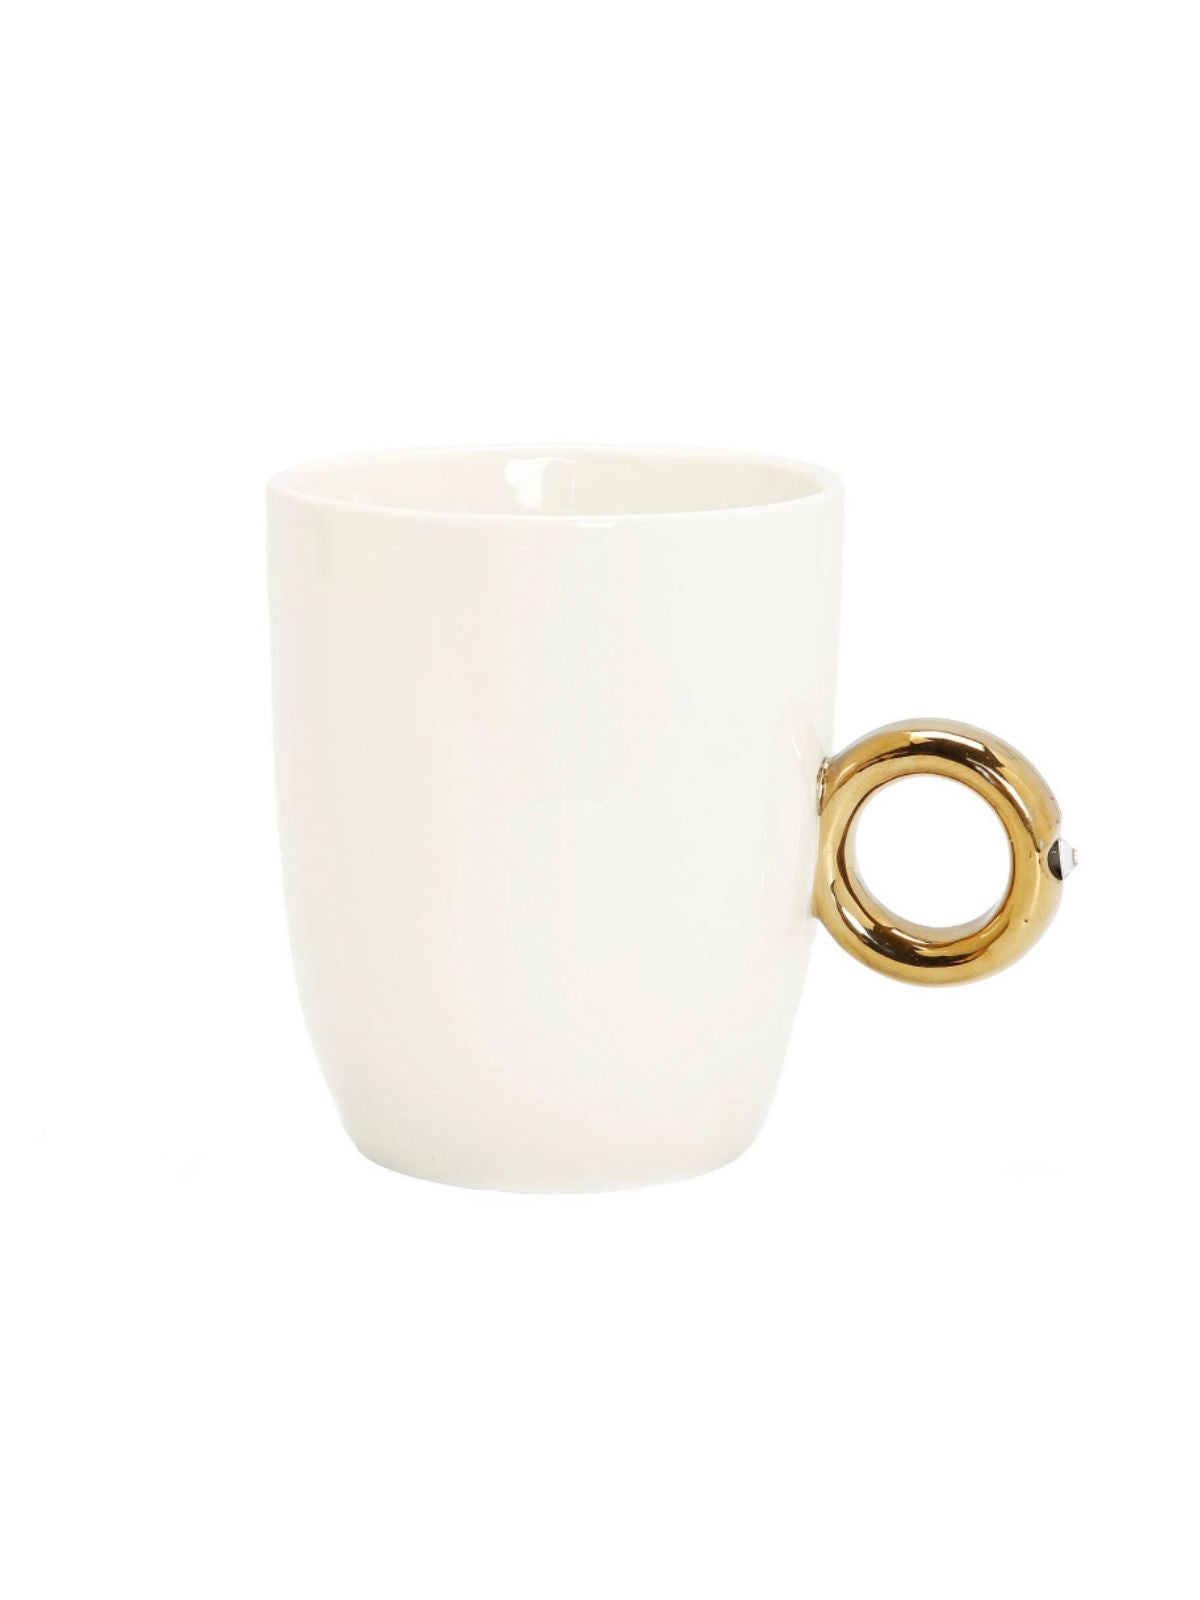 This is a gorgeous white and gold coffee mug with beautiful gold handle. Its gold ring handle and clear crystal detail is sure to become a favorite on your coffee station.  